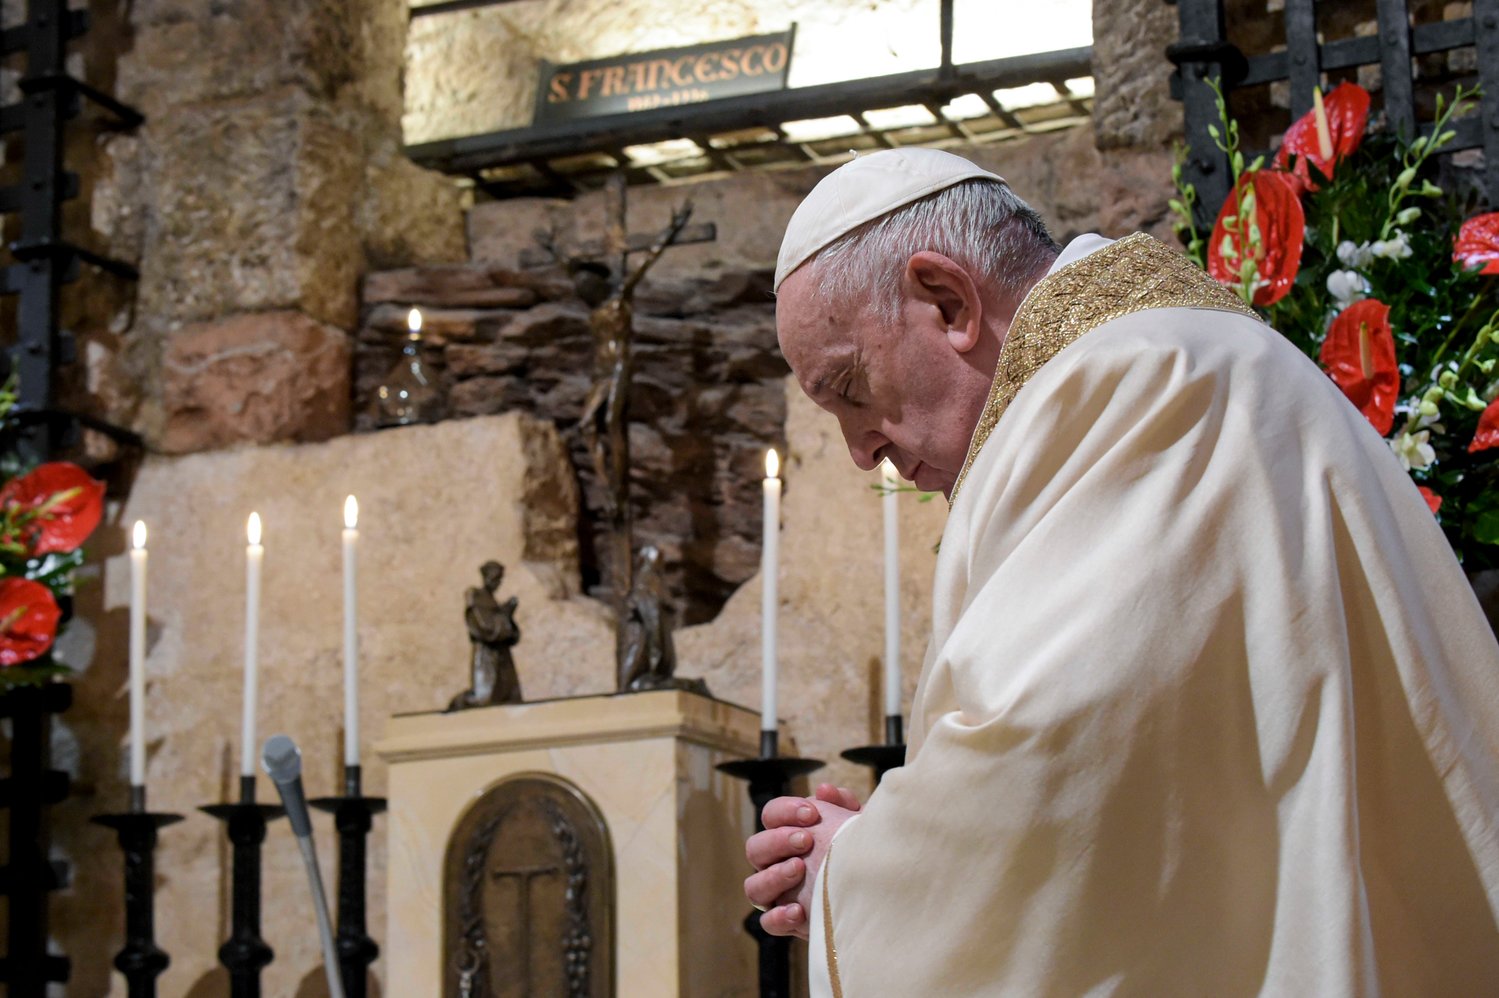 Pope Francis celebrates Mass at the tomb of St. Francis in the crypt of the Basilica of St. Francis in Assisi, Italy, Oct. 3, 2020. The pope signed his new encyclical, "Fratelli Tutti, on Fraternity and Social Friendship," at the end of the Mass.